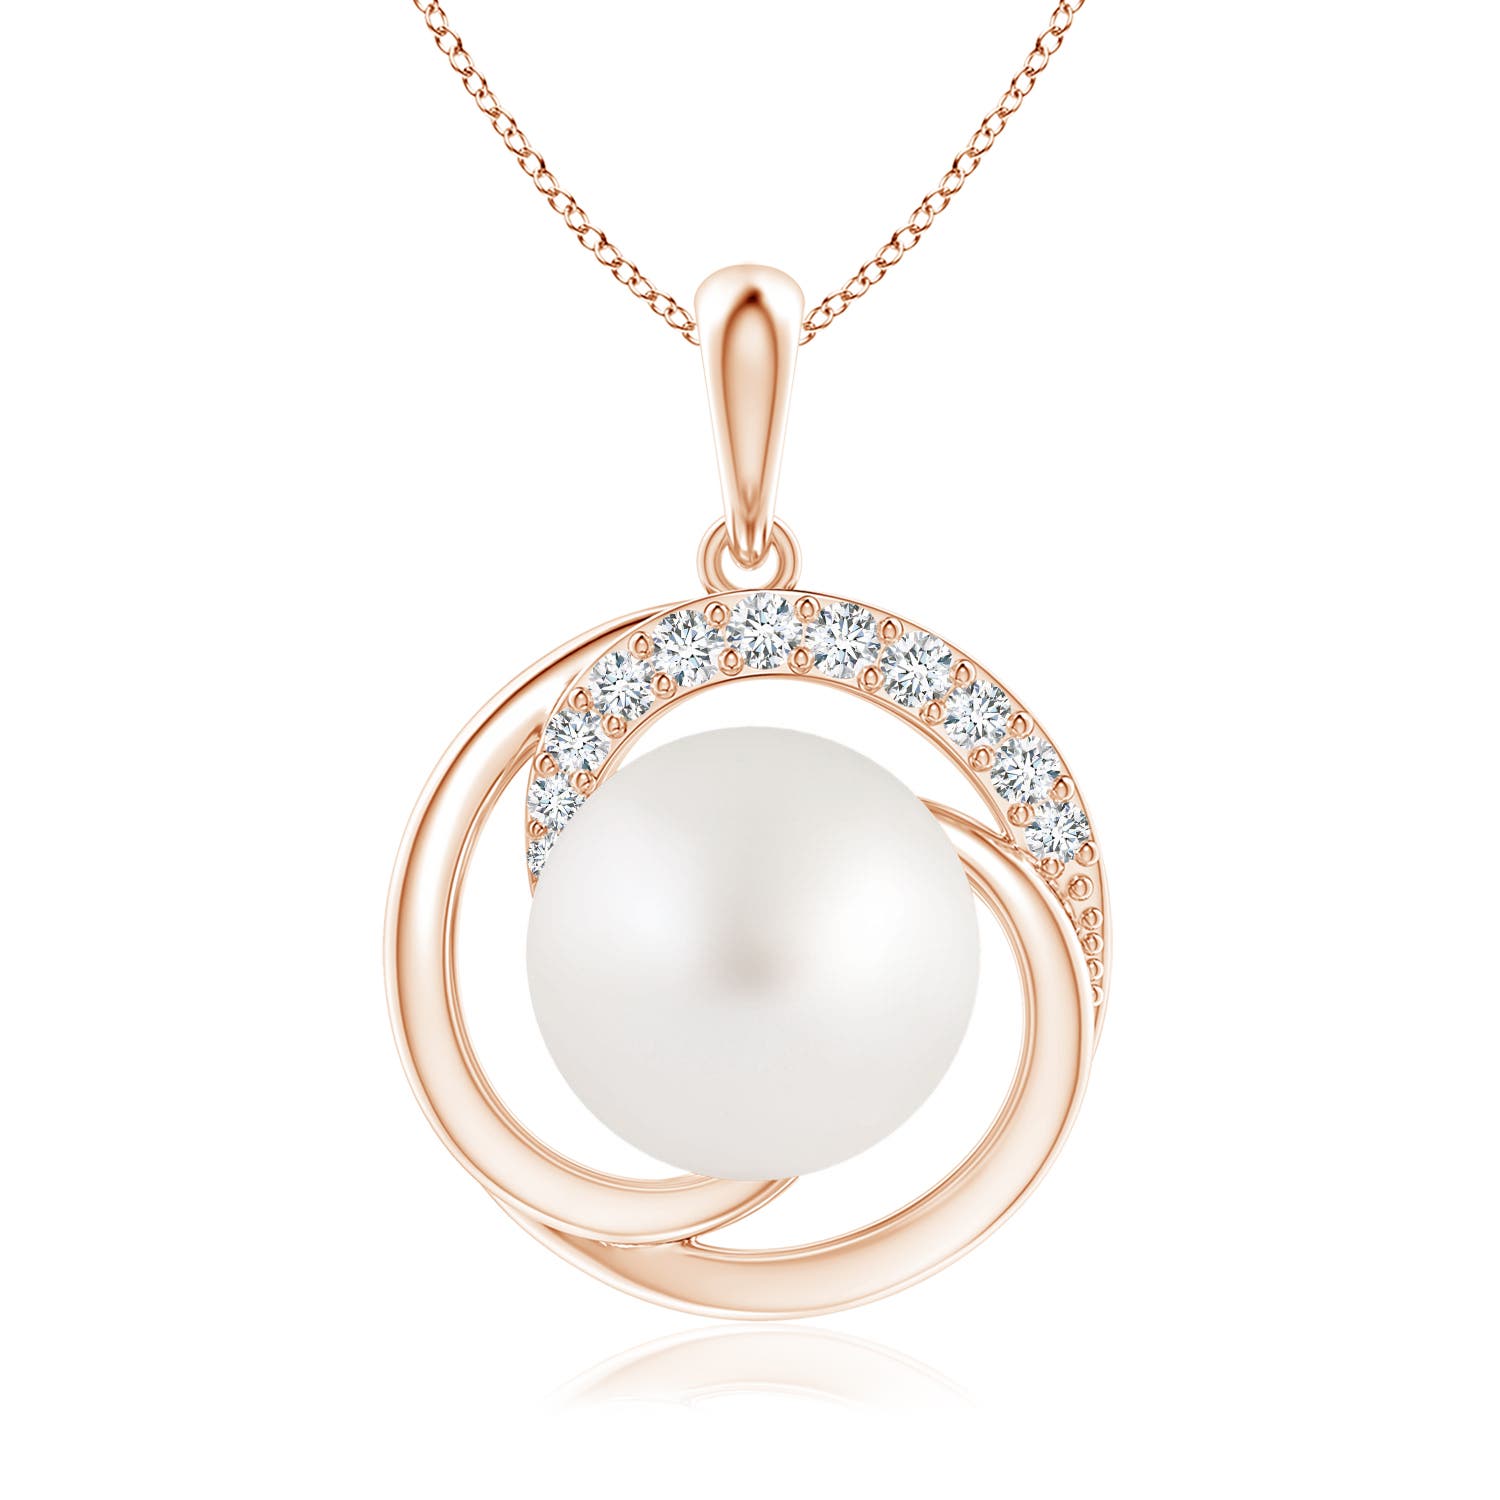 AA - South Sea Cultured Pearl / 7.33 CT / 14 KT Rose Gold